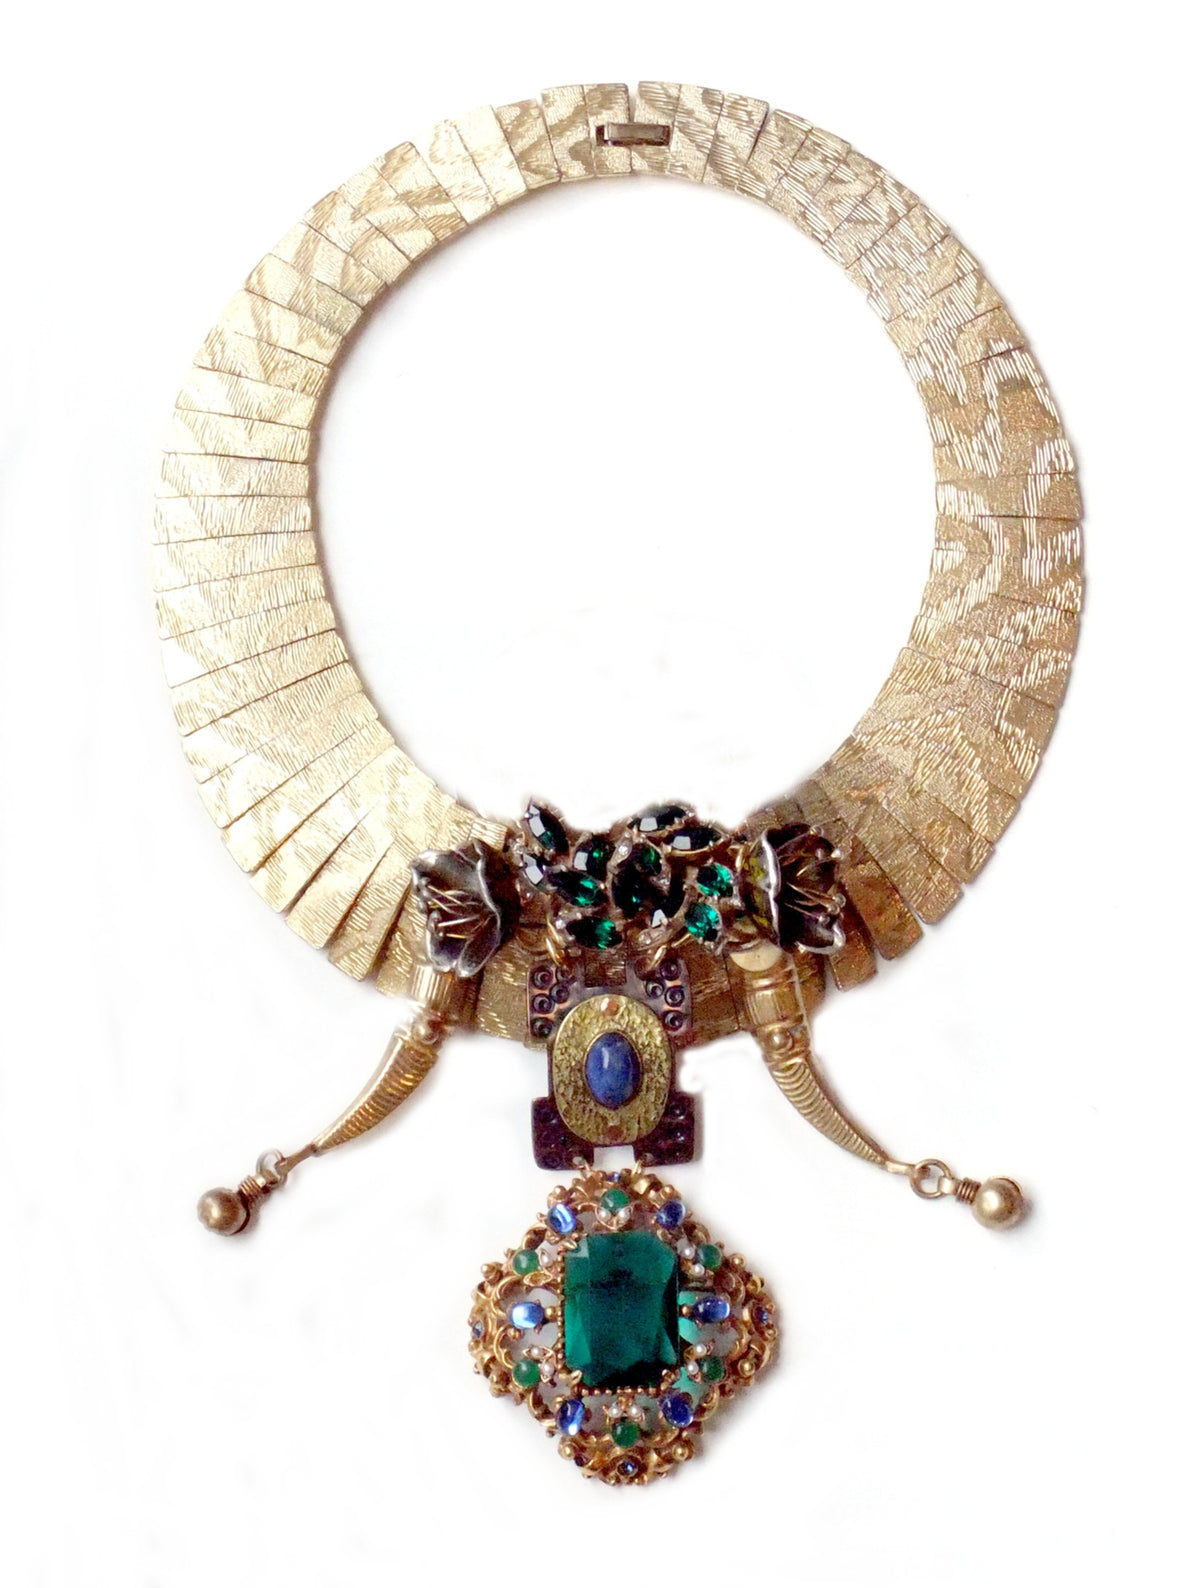 1930s Gems and Gilded Tusks